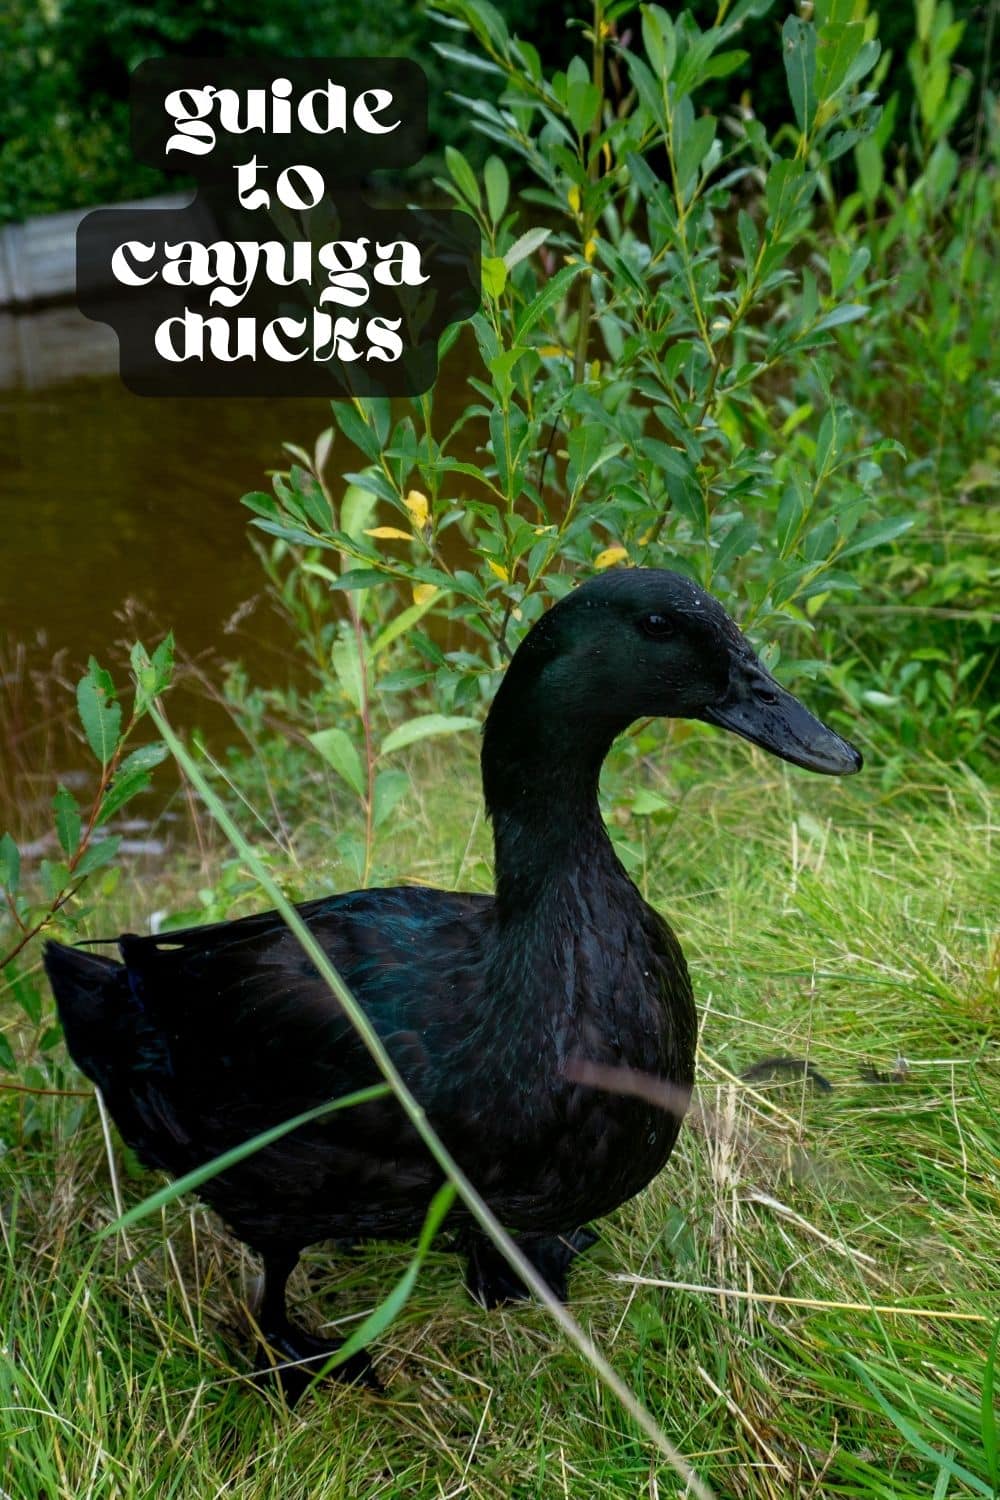 Are you looking for a friendly, medium-sized duck to add to your flock? With their striking appearance and uniquely colored eggs, you can't go wrong with a Cayuga duck! Learn more about these beautiful birds and how to care for them in this comprehensive guide.